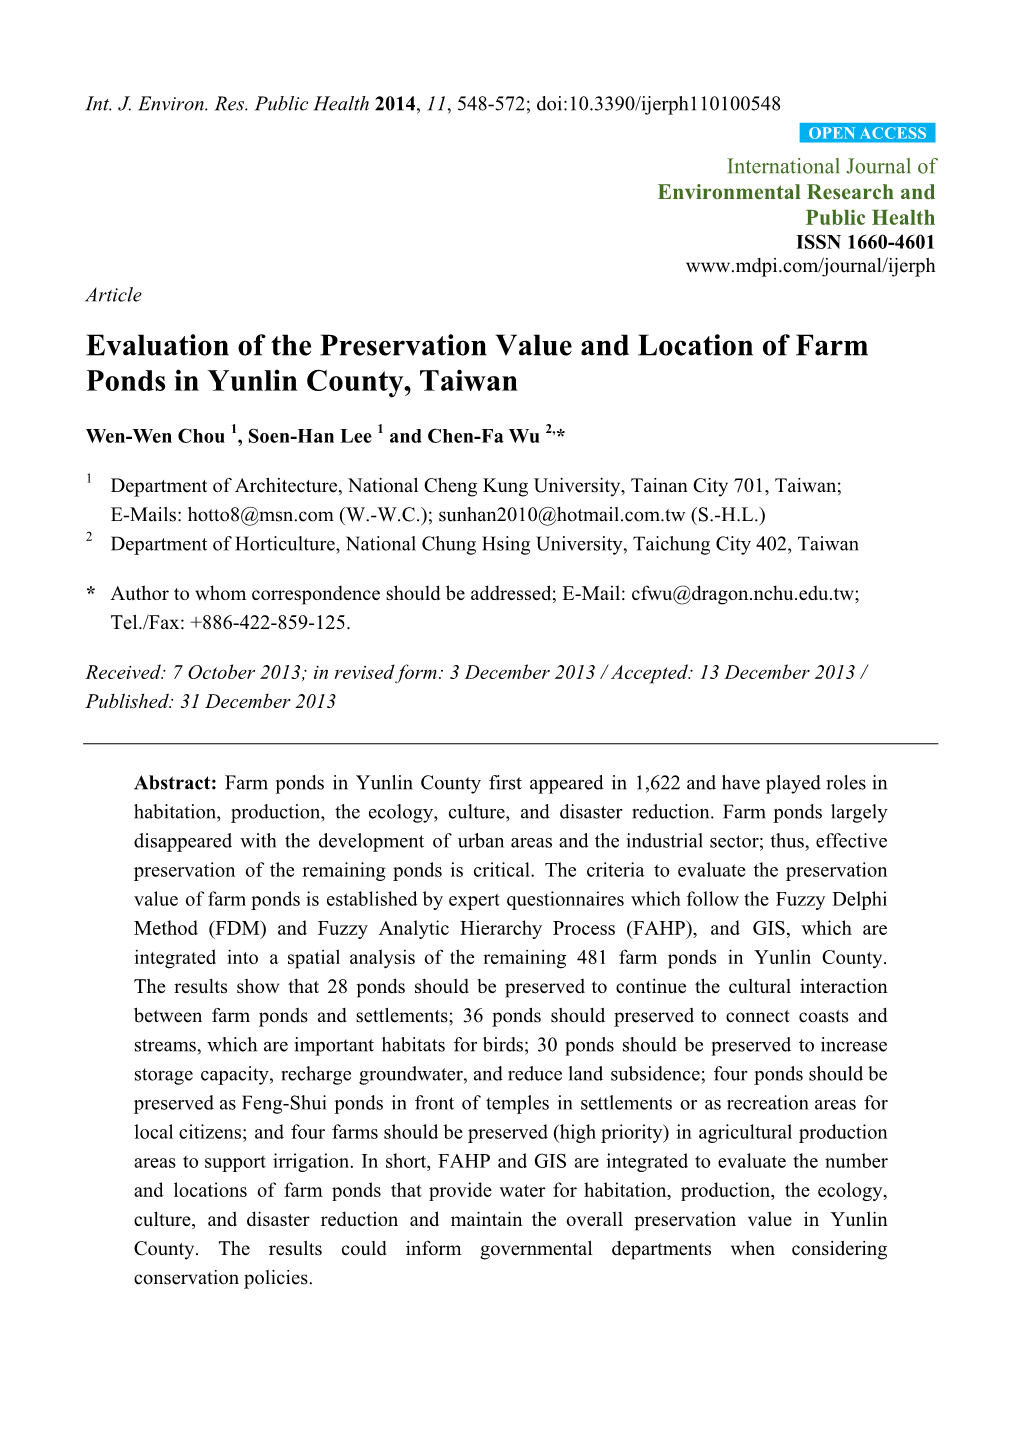 Evaluation of the Preservation Value and Location of Farm Ponds in Yunlin County, Taiwan